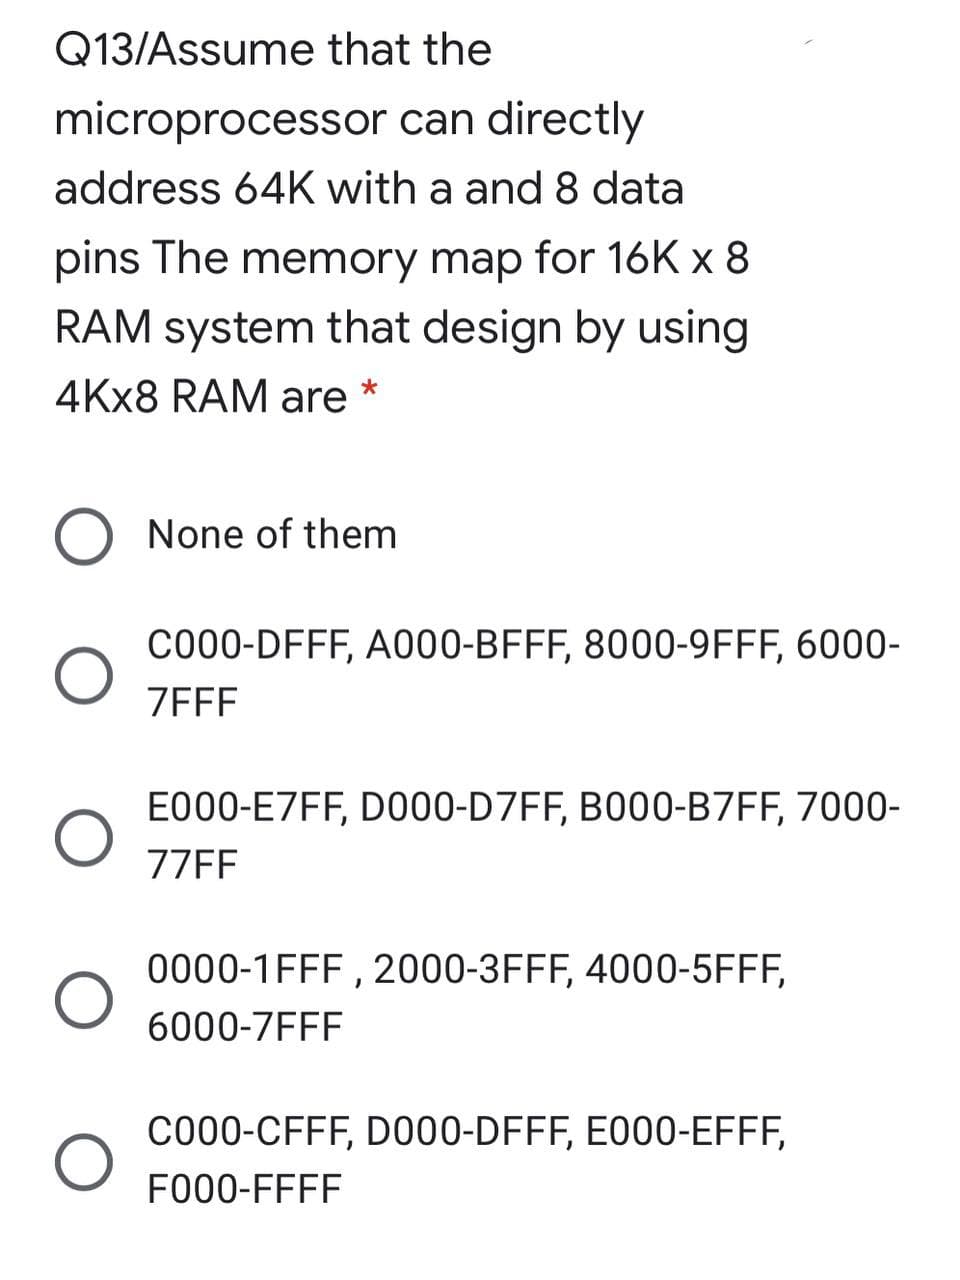 Q13/Assume that the
microprocessor can directly
address 64K with a and 8 data
pins The memory map for 16K x 8
RAM system that design by using
4KX8 RAM are *
O None of them
C000-DFFF, A000-BFFF, 8000-9FFF, 6000-
ZEFF
E000-E7FF, D000-D7FF, B000-B7FF, 7000-
77FF
0000-1FFF , 2000-3FFF, 4000-5FFF,
6000-7FFF
C000-CFFF, D000-DFFF, E000-EFFF,
FO00-FFFF
